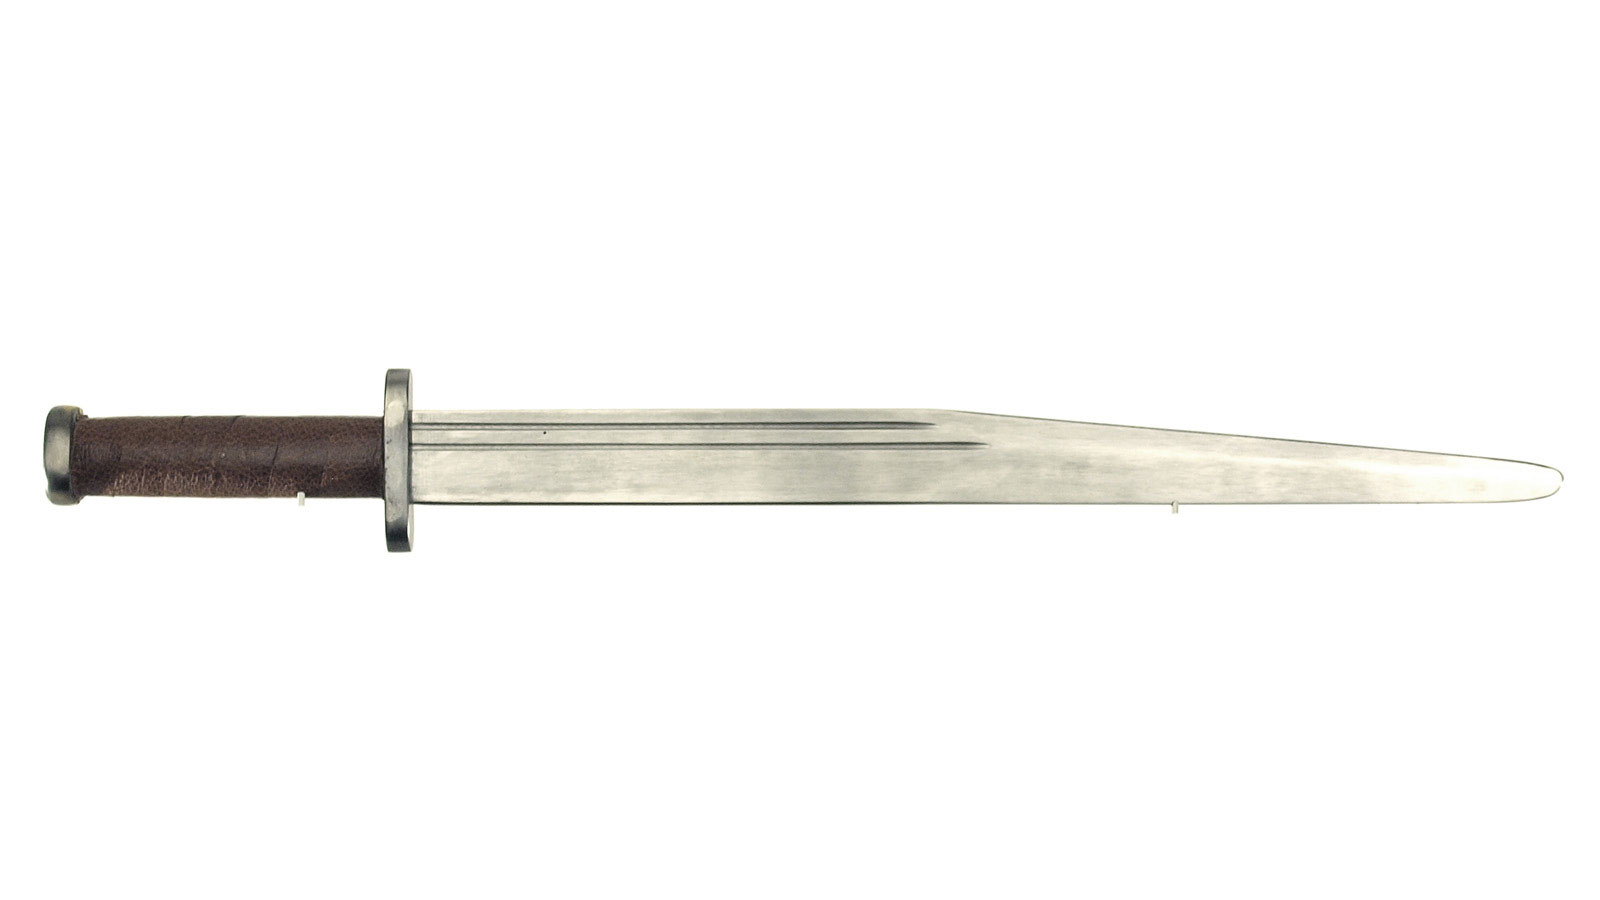 Long Sax Knife, Version Feather Blade